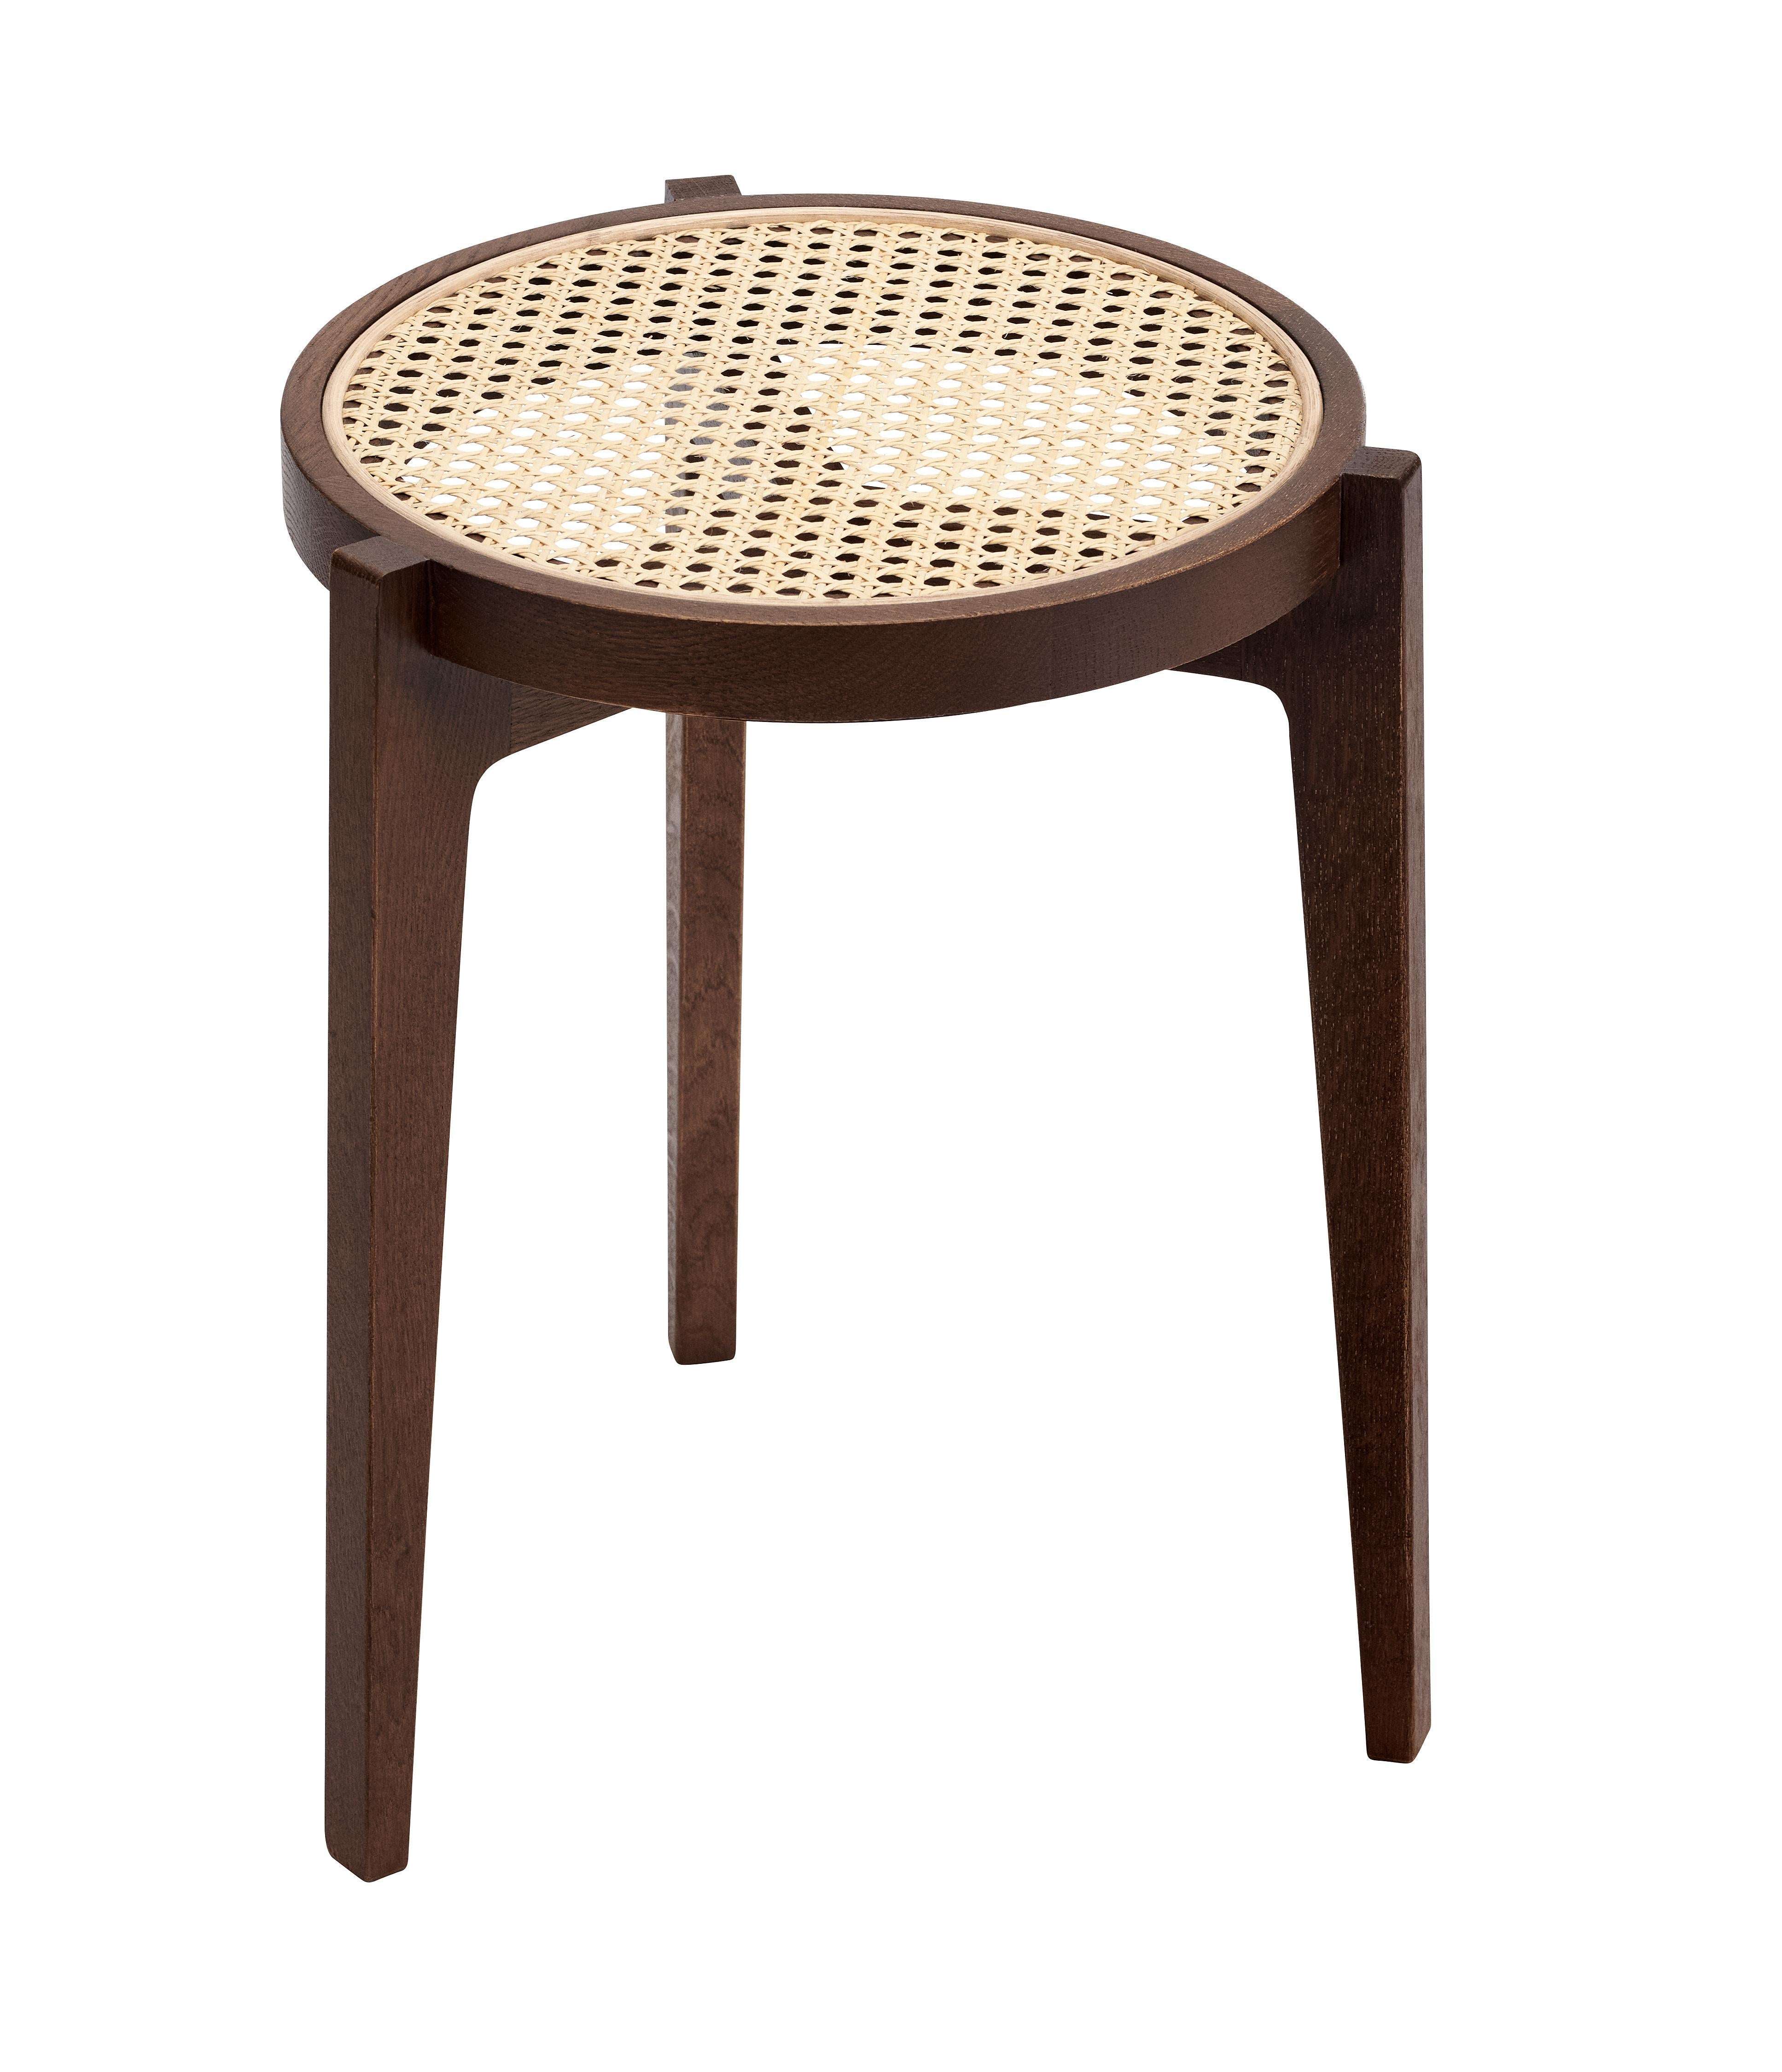 Rattan Scandinavian Stool 'Le Roi' by Norr11, Dark Smoked Oak (in stock) For Sale